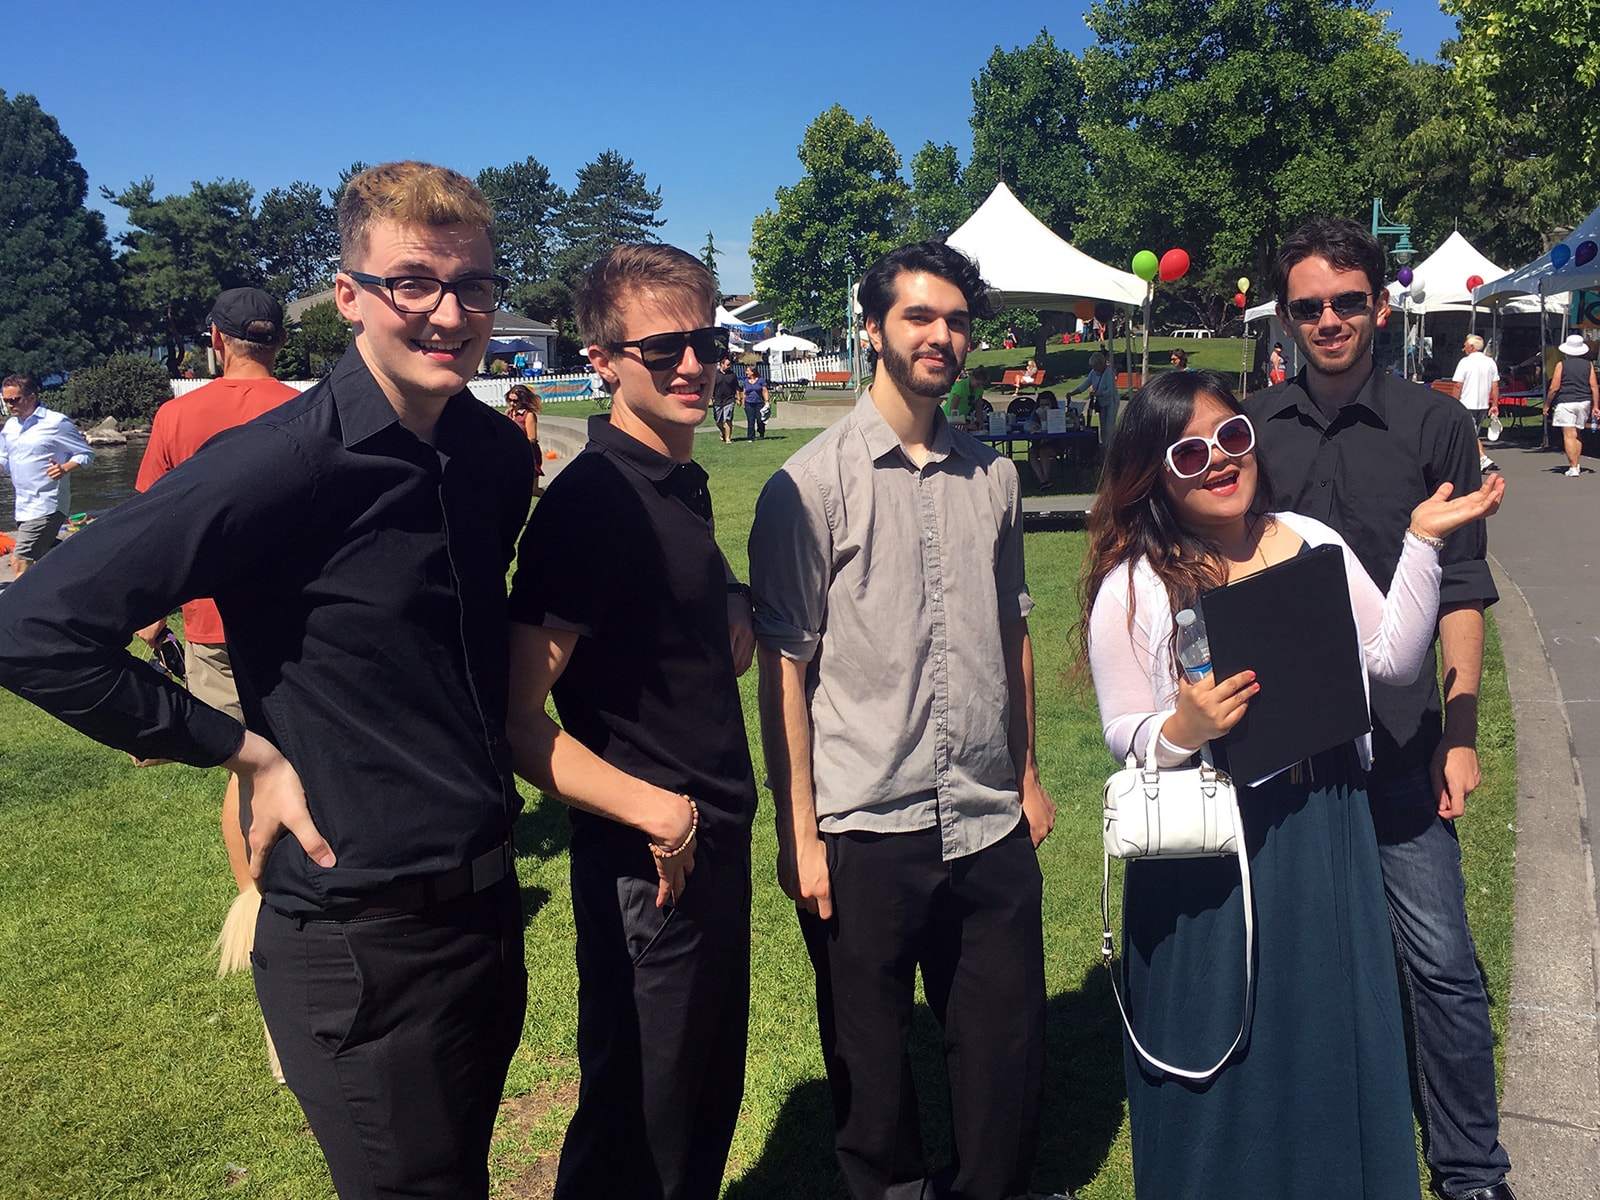 Members of the DigiPen Jazz Ensemble at Kirkland Summerfest on a beautiful sunny day